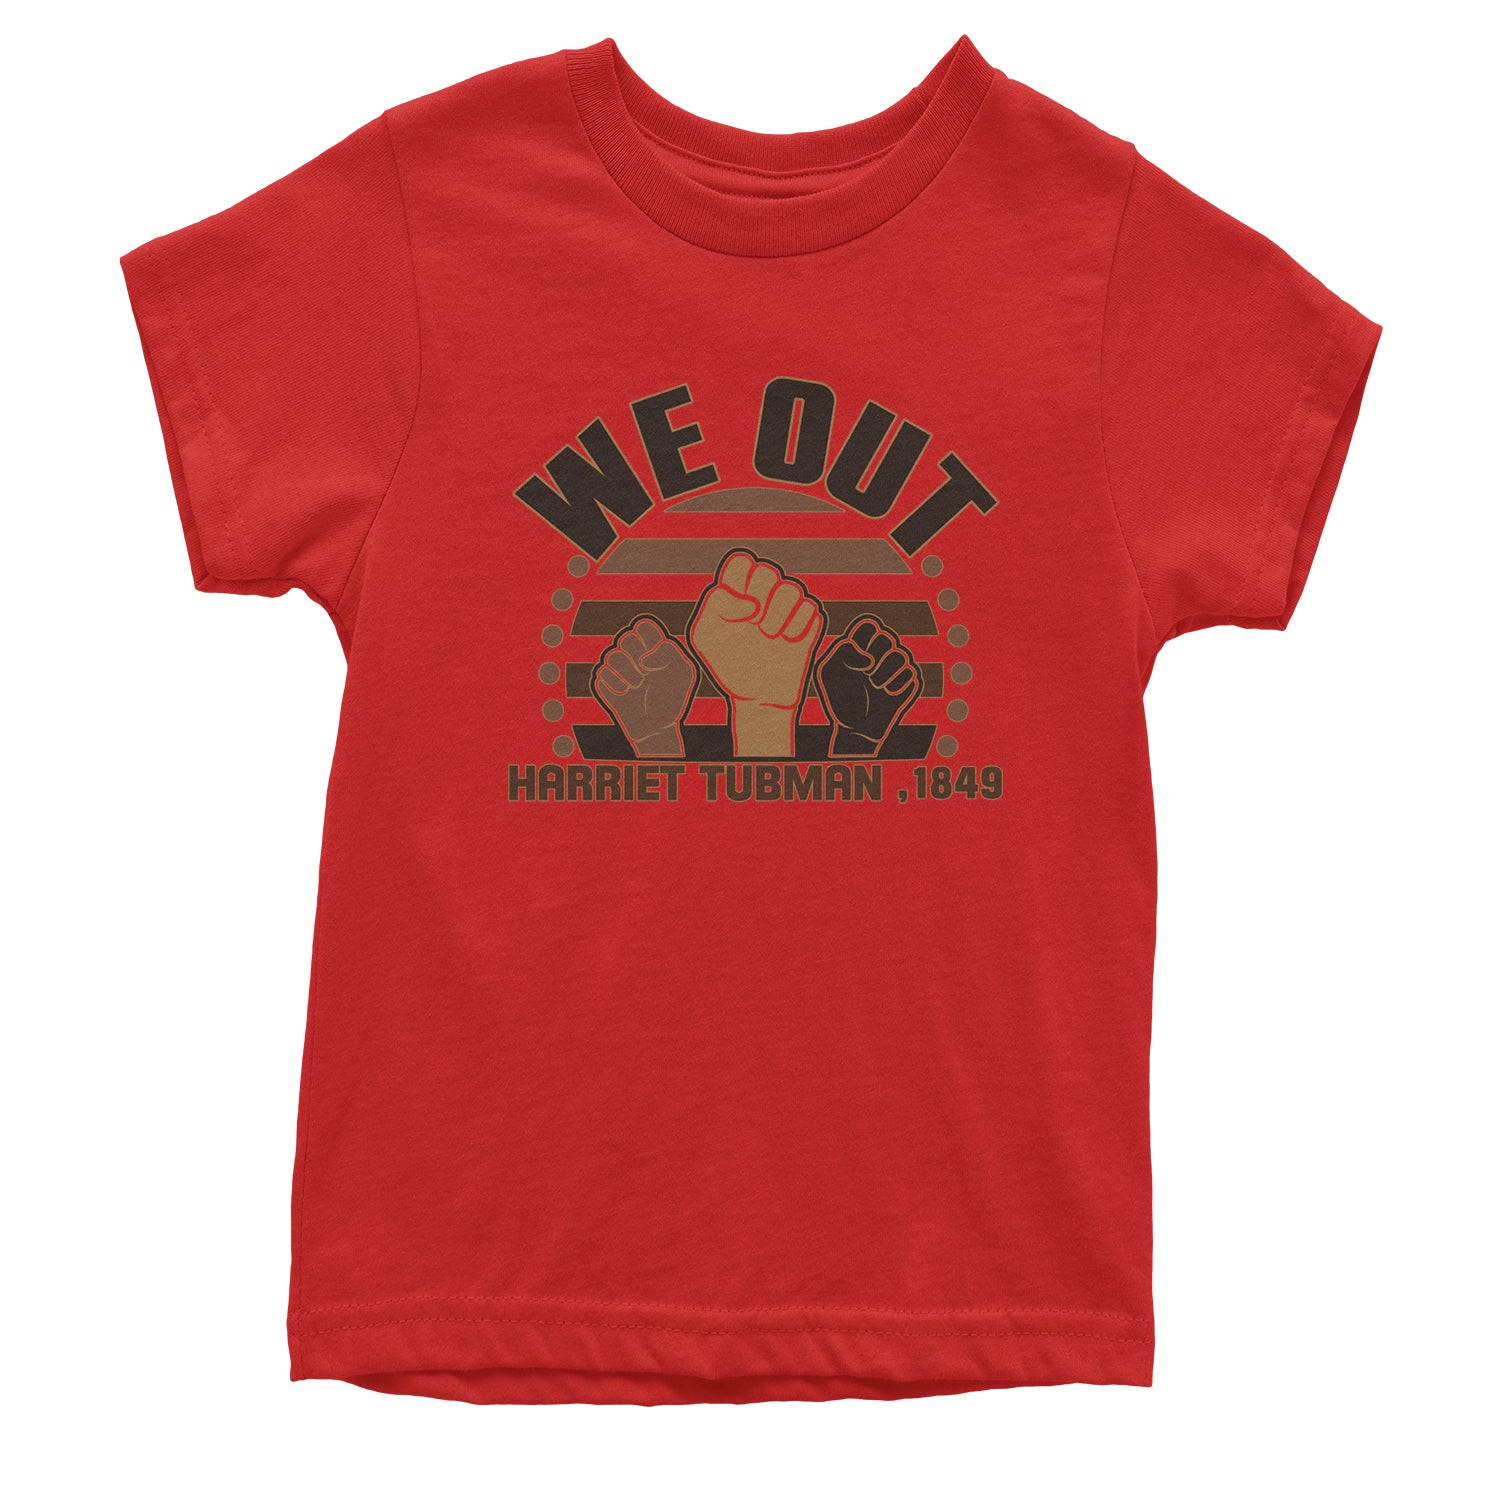 We Out Harriet Tubman Raised Fists BLM Youth T-shirt african, american, black, blm, harriet, harriett, lives, matter, out, shirt, tubman, we by Expression Tees